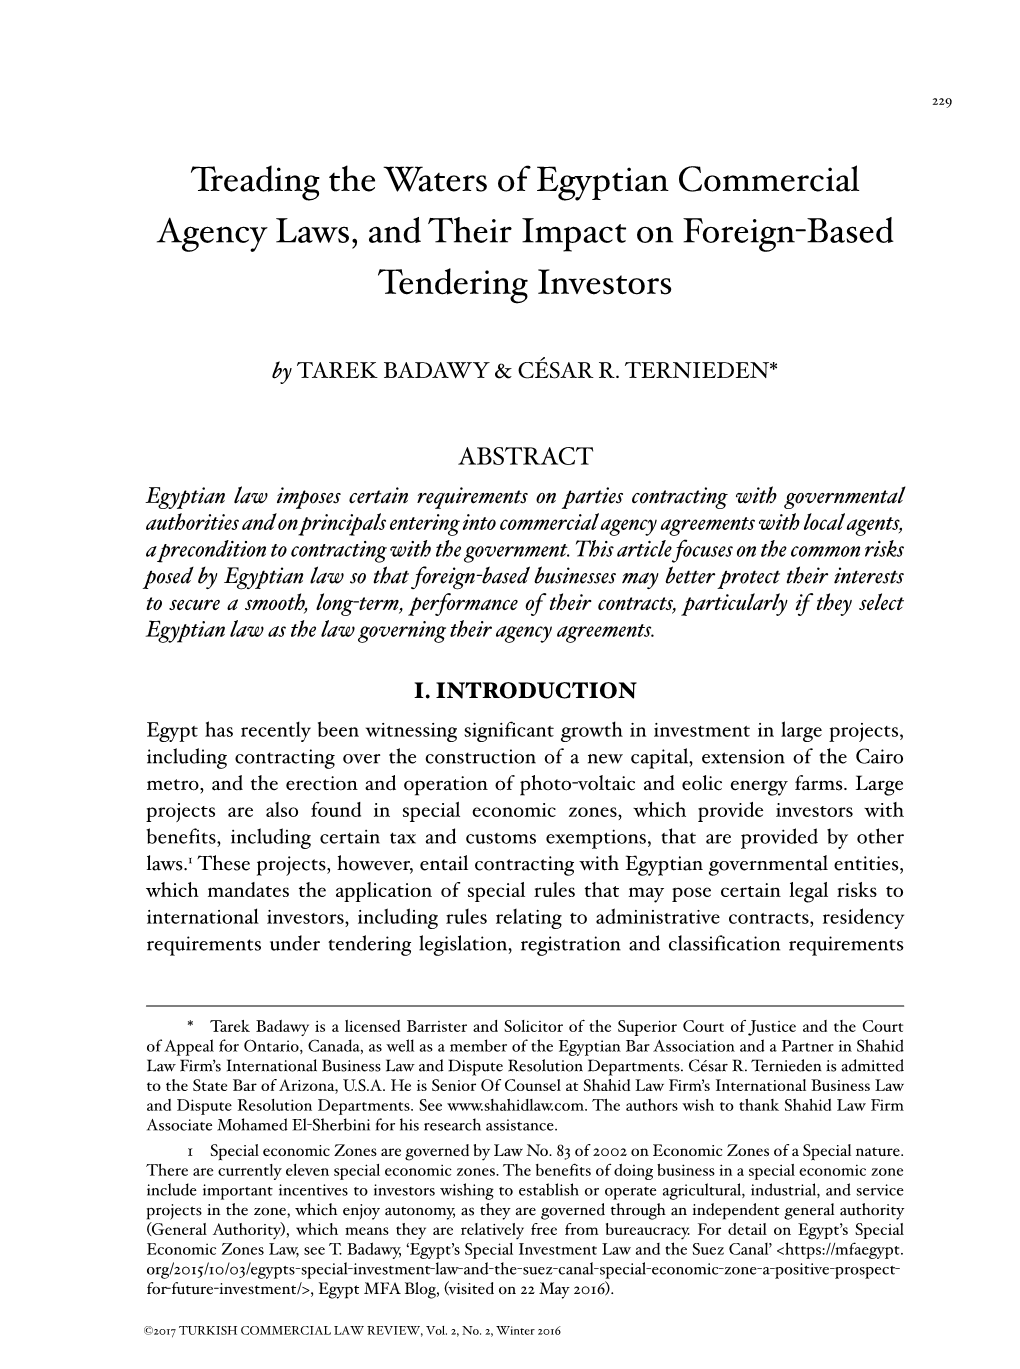 Treading the Waters of Egyptian Commercial Agency Laws, and Their Impact on Foreign-Based Tendering Investors